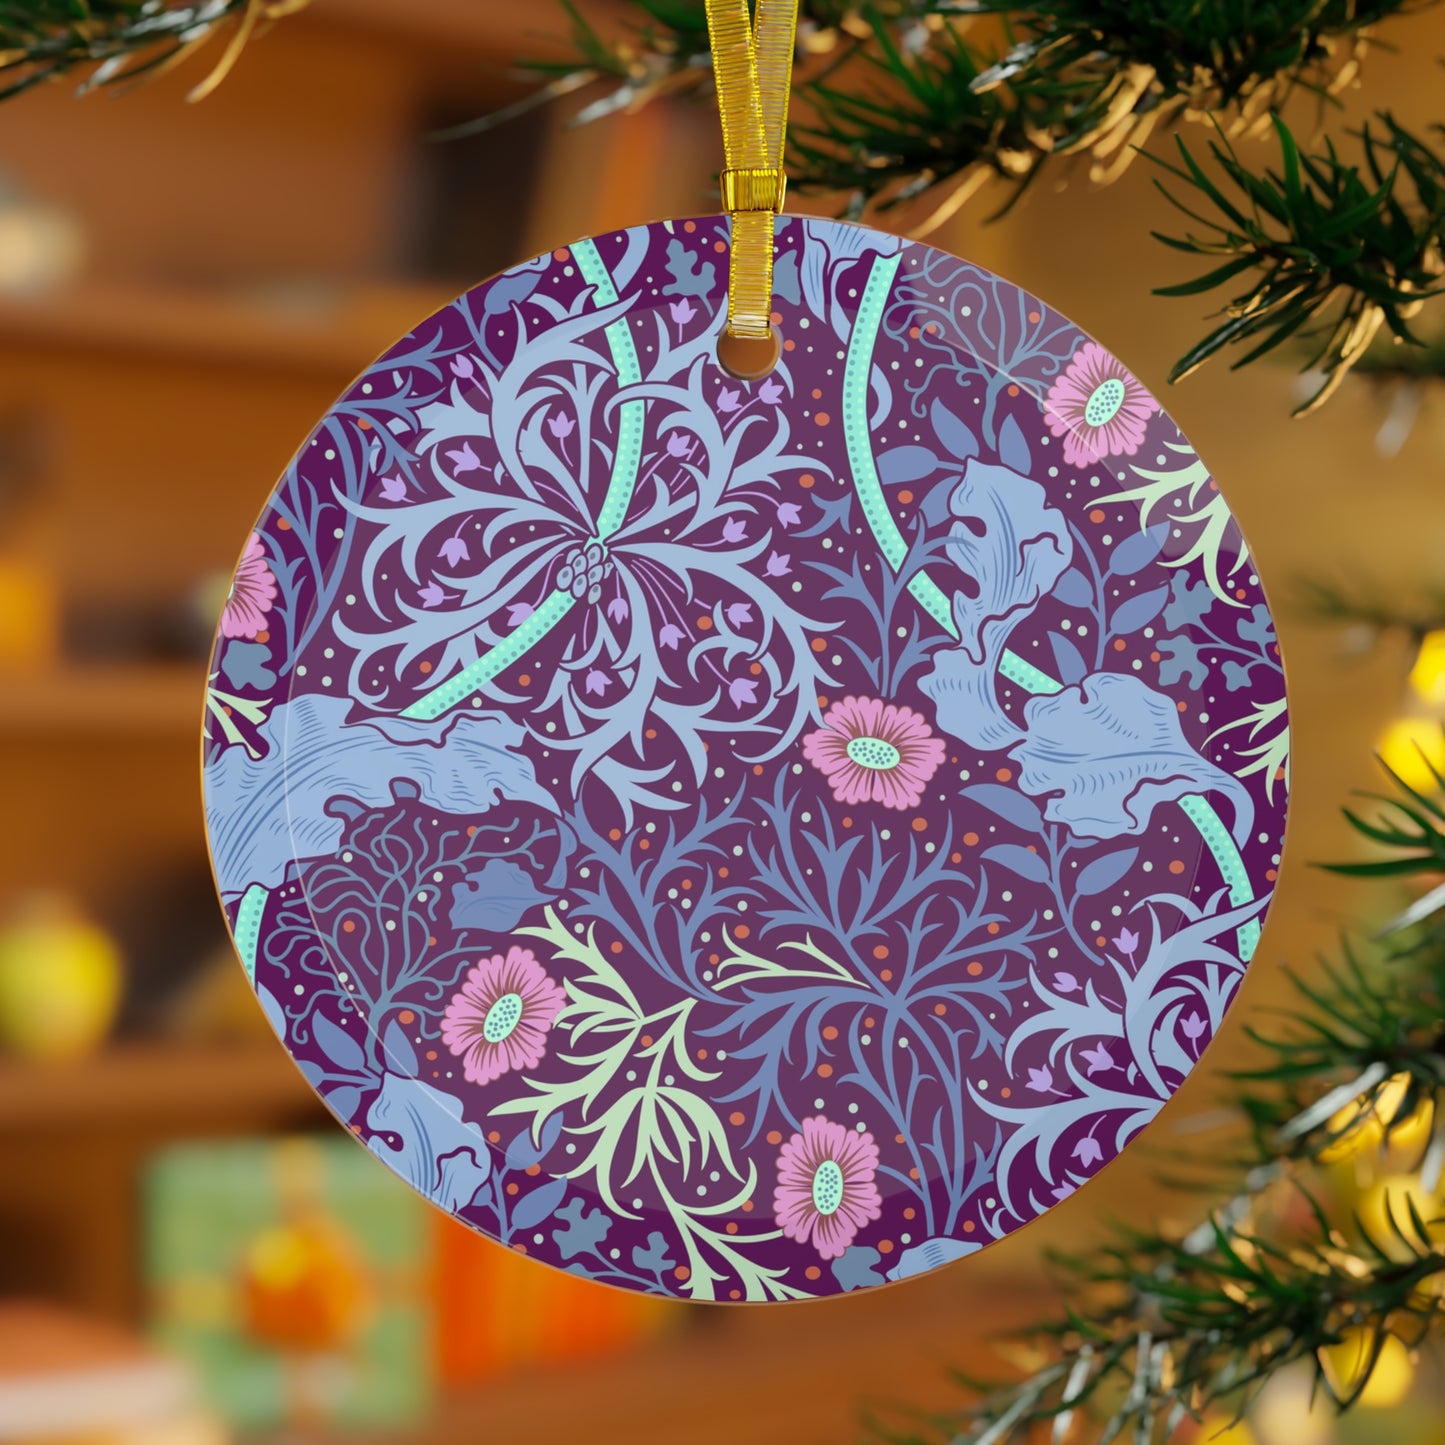 william-morris-co-christmas-heirloom-glass-ornament-seaweed-collection-pink-flowers-1